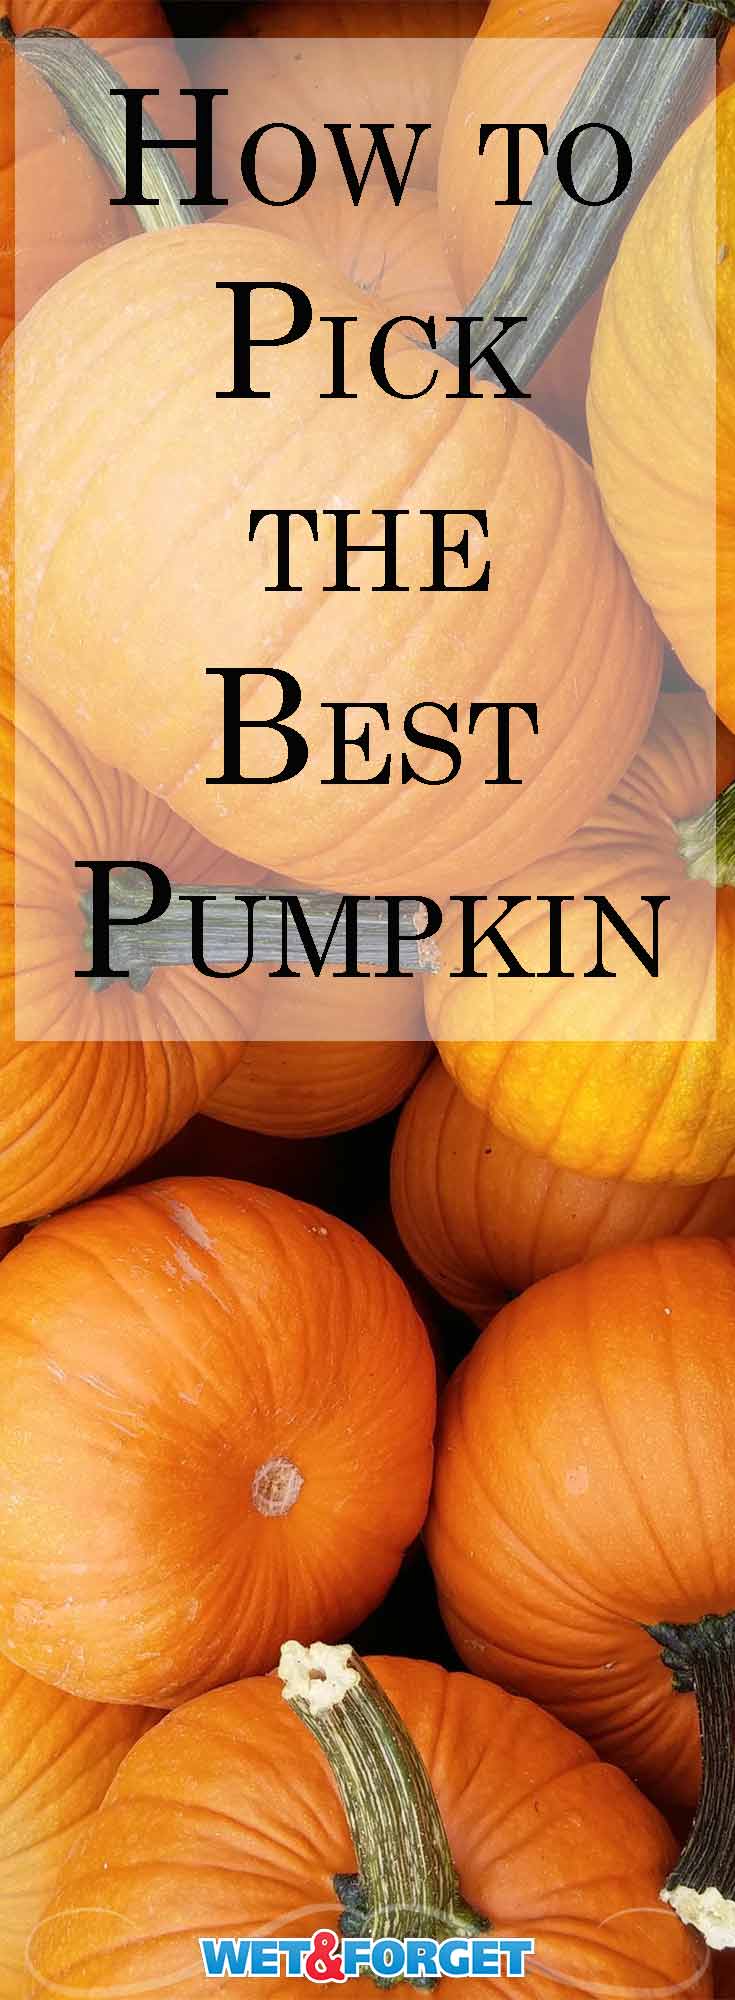 Pumpkins come in many shapes, sizes and colors. Use our guide to pick the best pumpkin for your needs! 